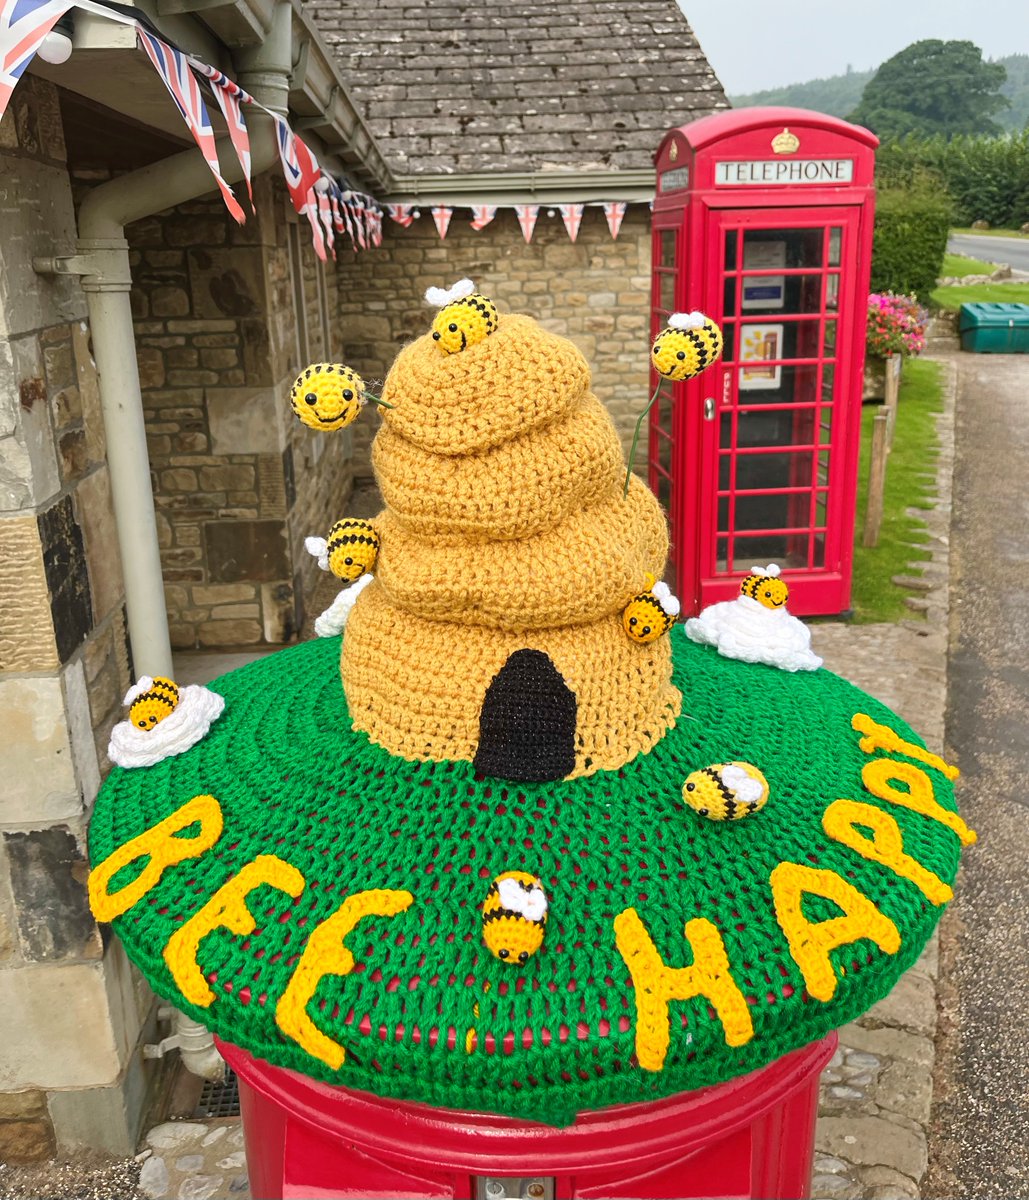 Don’t worry……Bee happy! The mysterious @barlickyarnfairies have been busy bees overnight working to deliver our unbee-lievable new post-box topper! Thank you very much, it's the bees-knees and is going to make so many visitors smile!